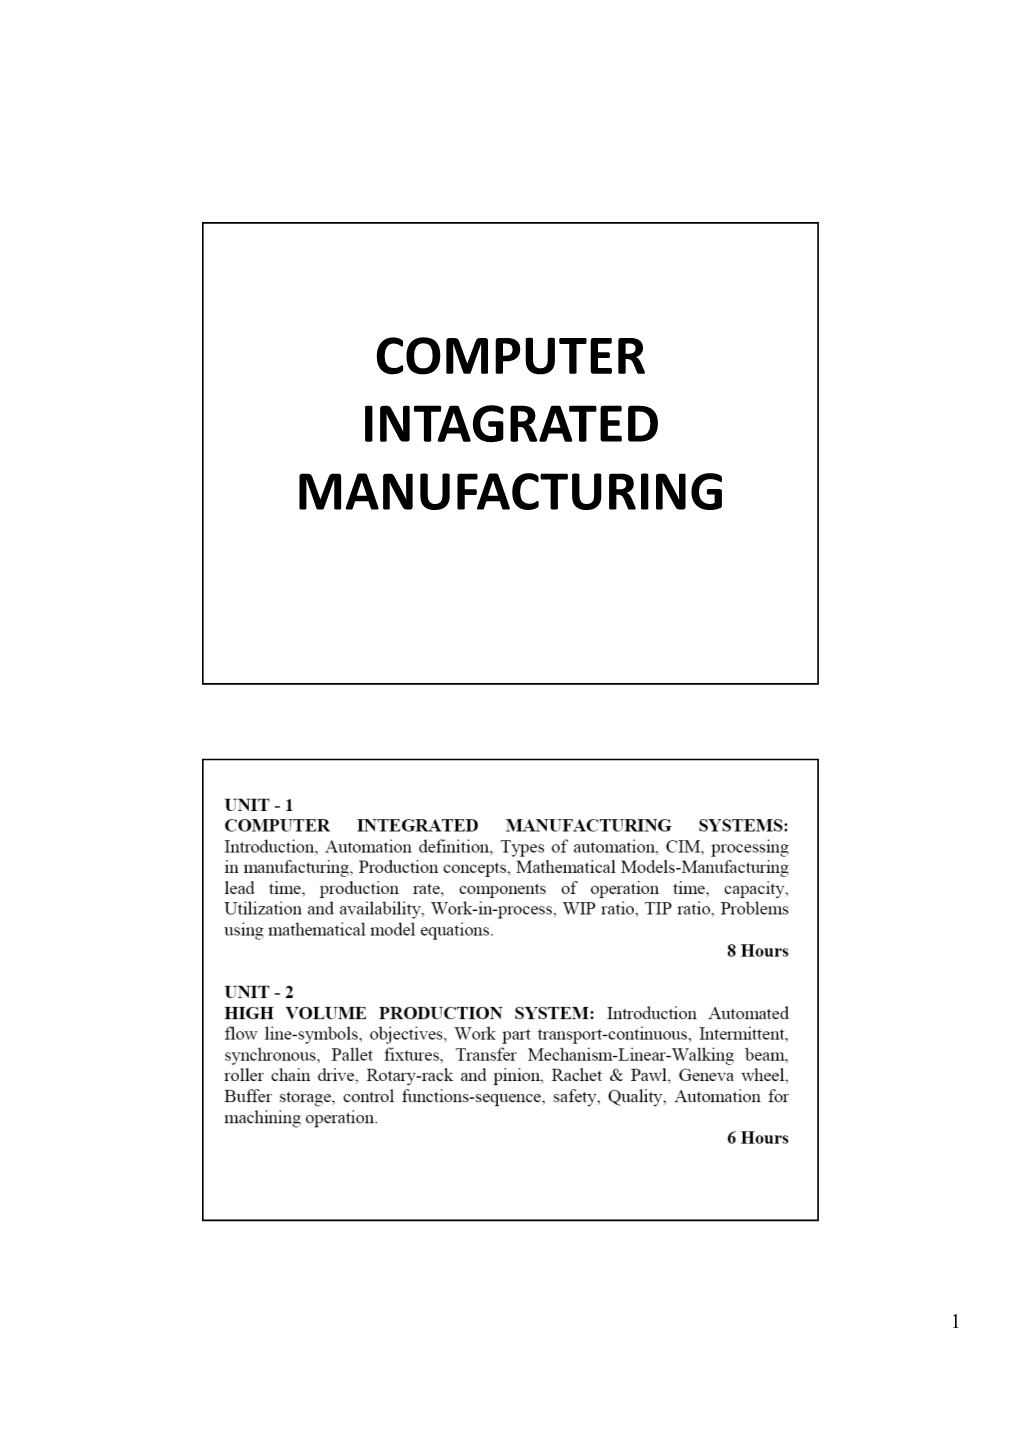 Computer Intagrated Manufacturing